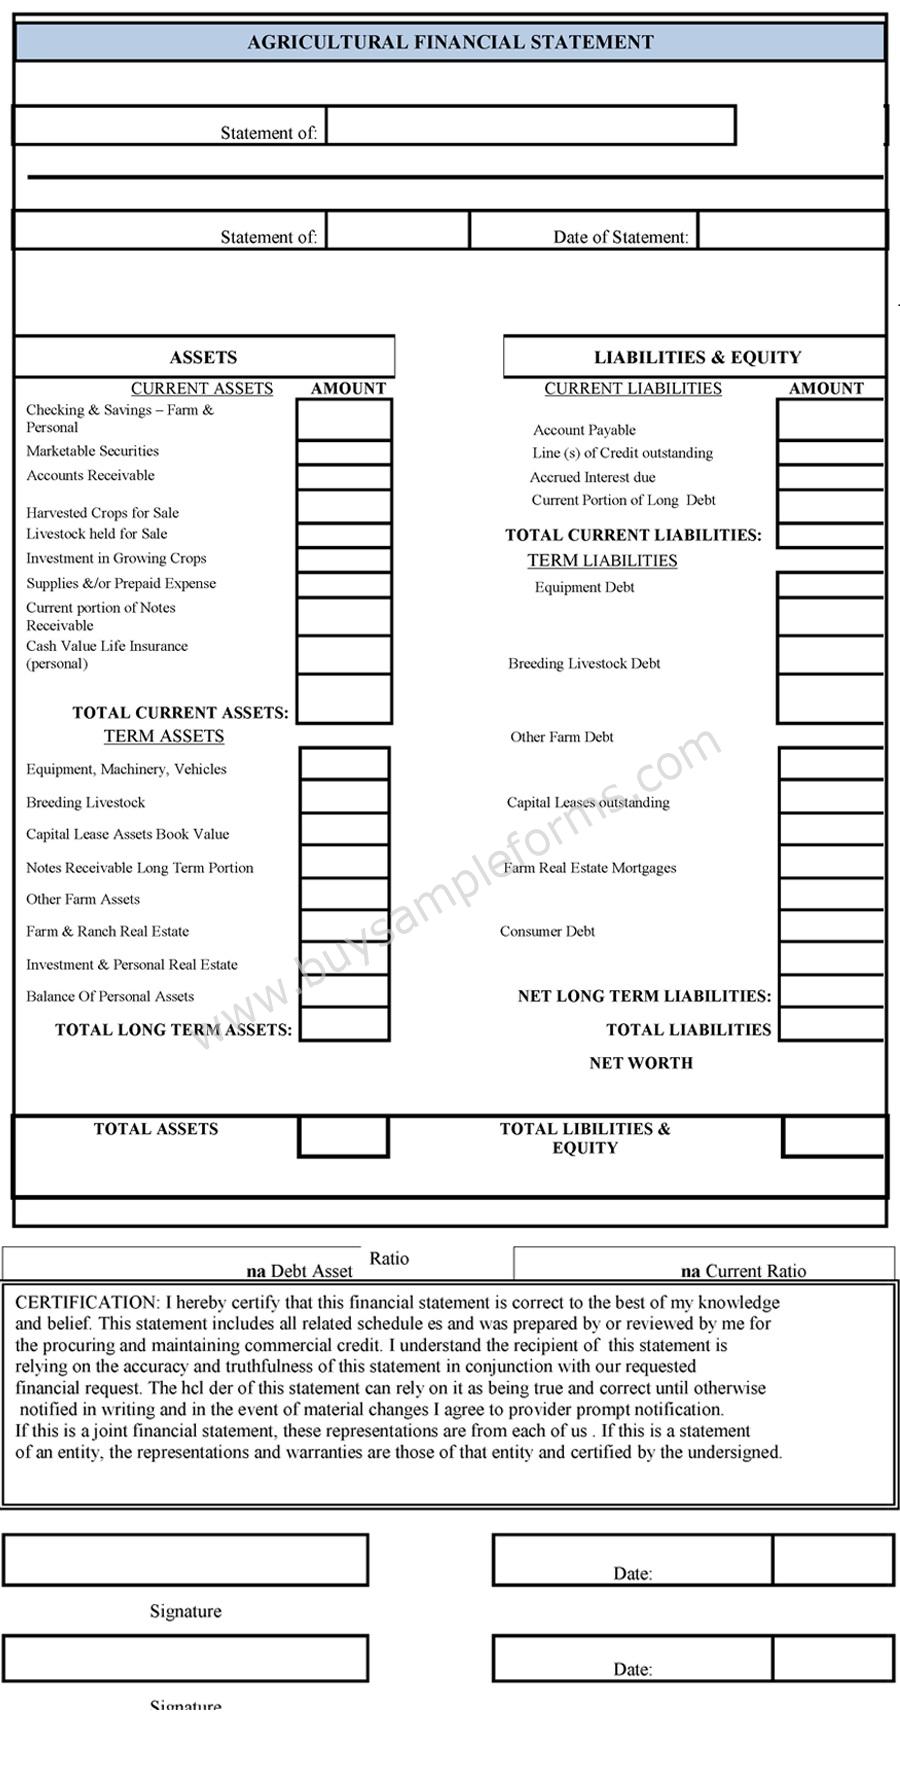 Agricultural Financial Statement Form